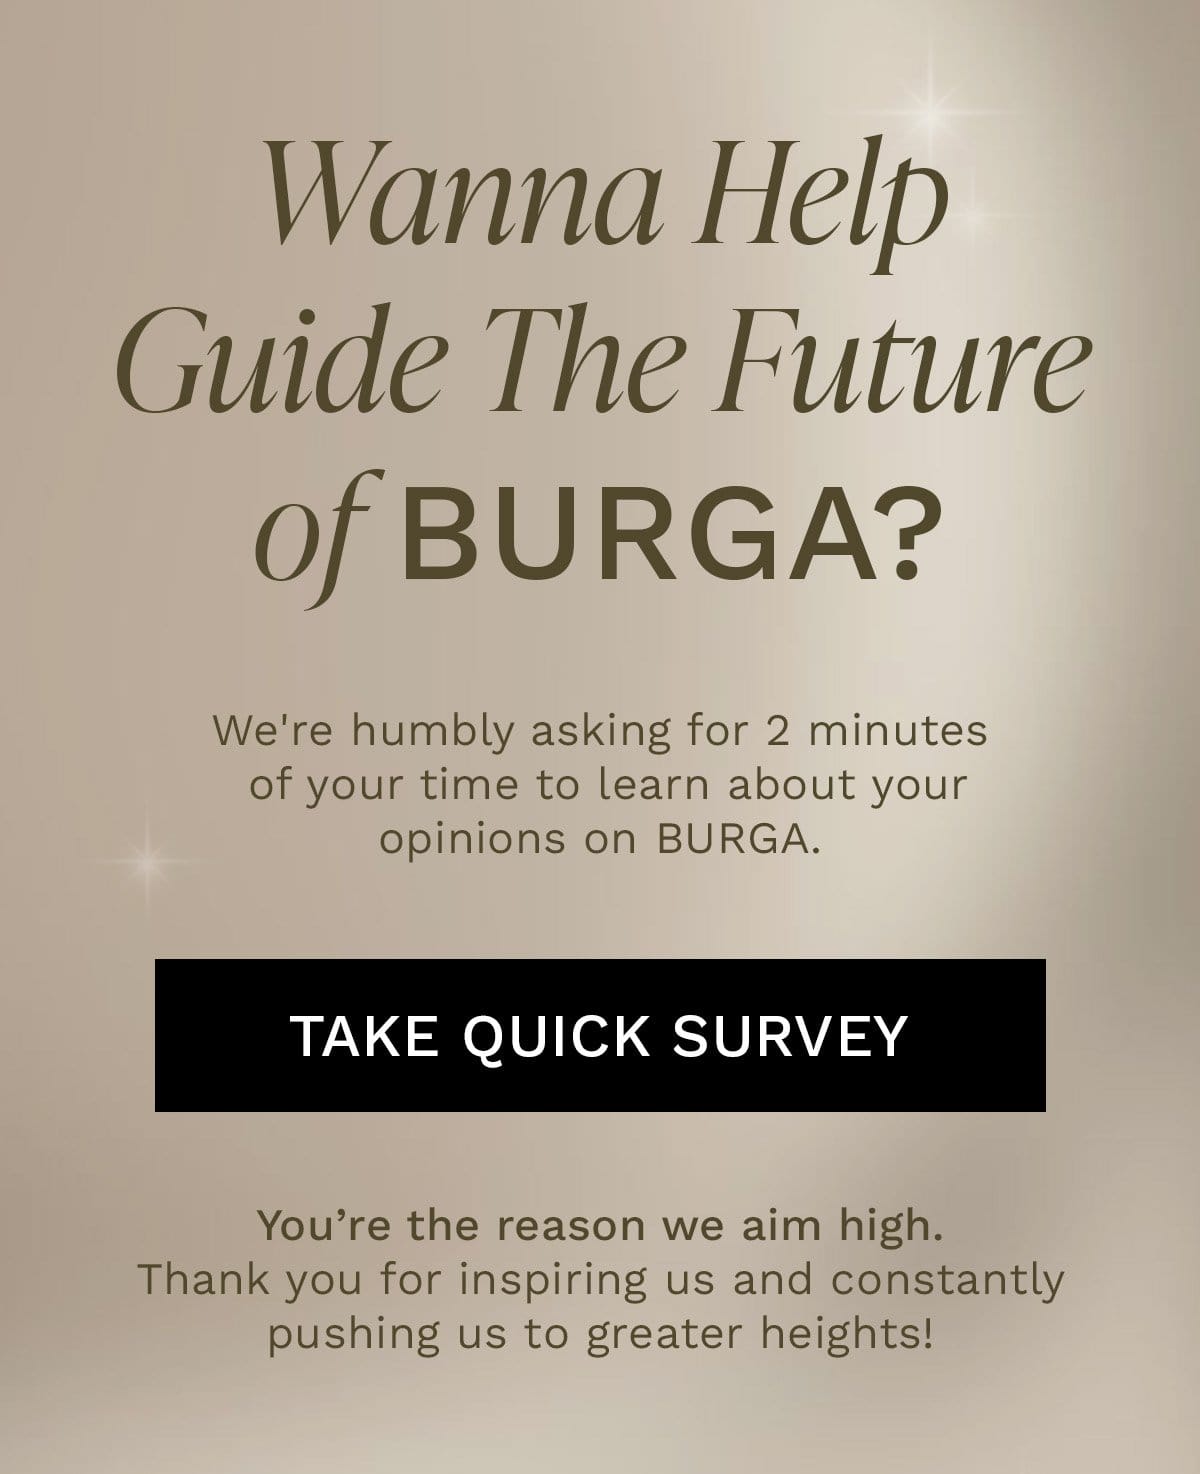 Wanna Help Guide The Future of BURGA? We're humbly asking for 2 minutes of your time to learn about your opinions on BURGA. [TAKE QUICK SURVEY] You’re the reason we aim high. Thank you for inspiring us and constantly pushing us to greater heights!